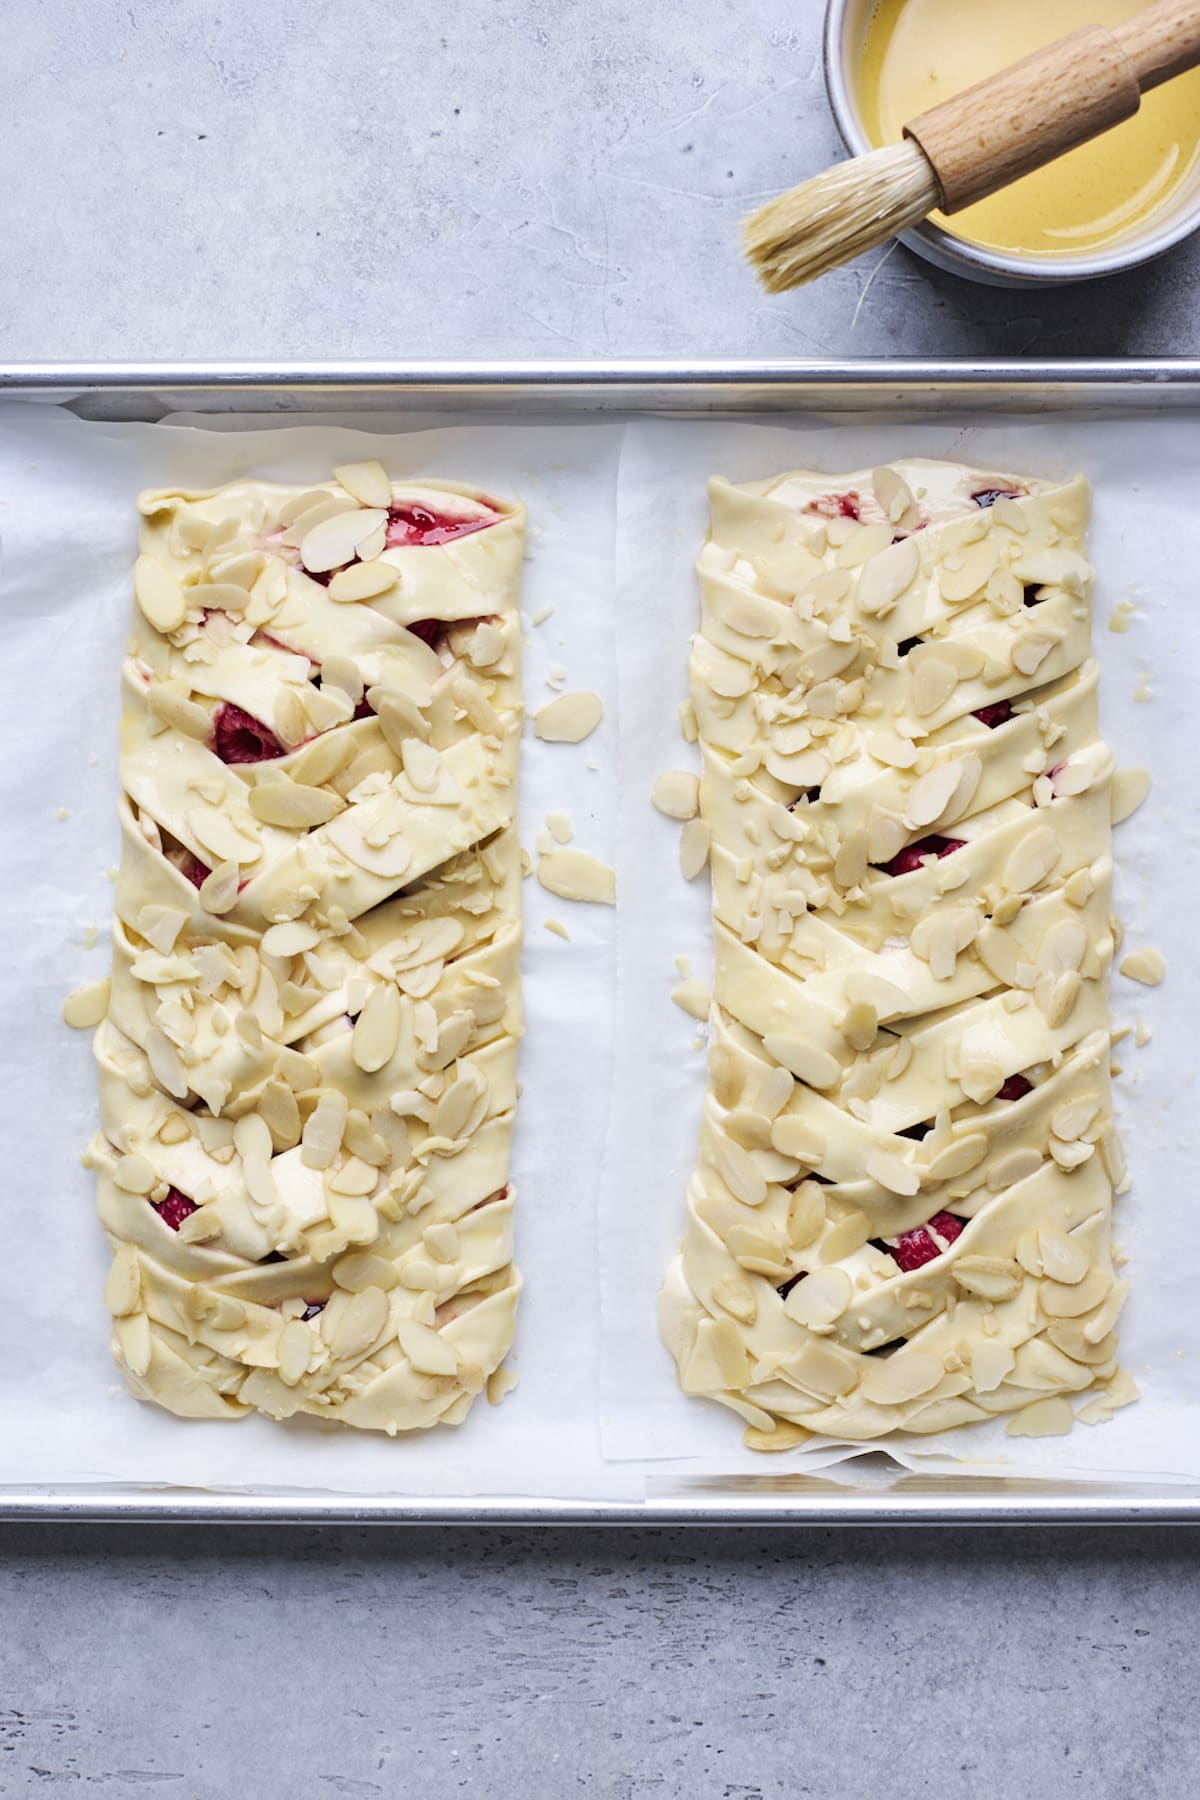 raspberry cream cheese breakfast braids on baking sheet with parchment paper topped with sliced almonds ready to be baked.